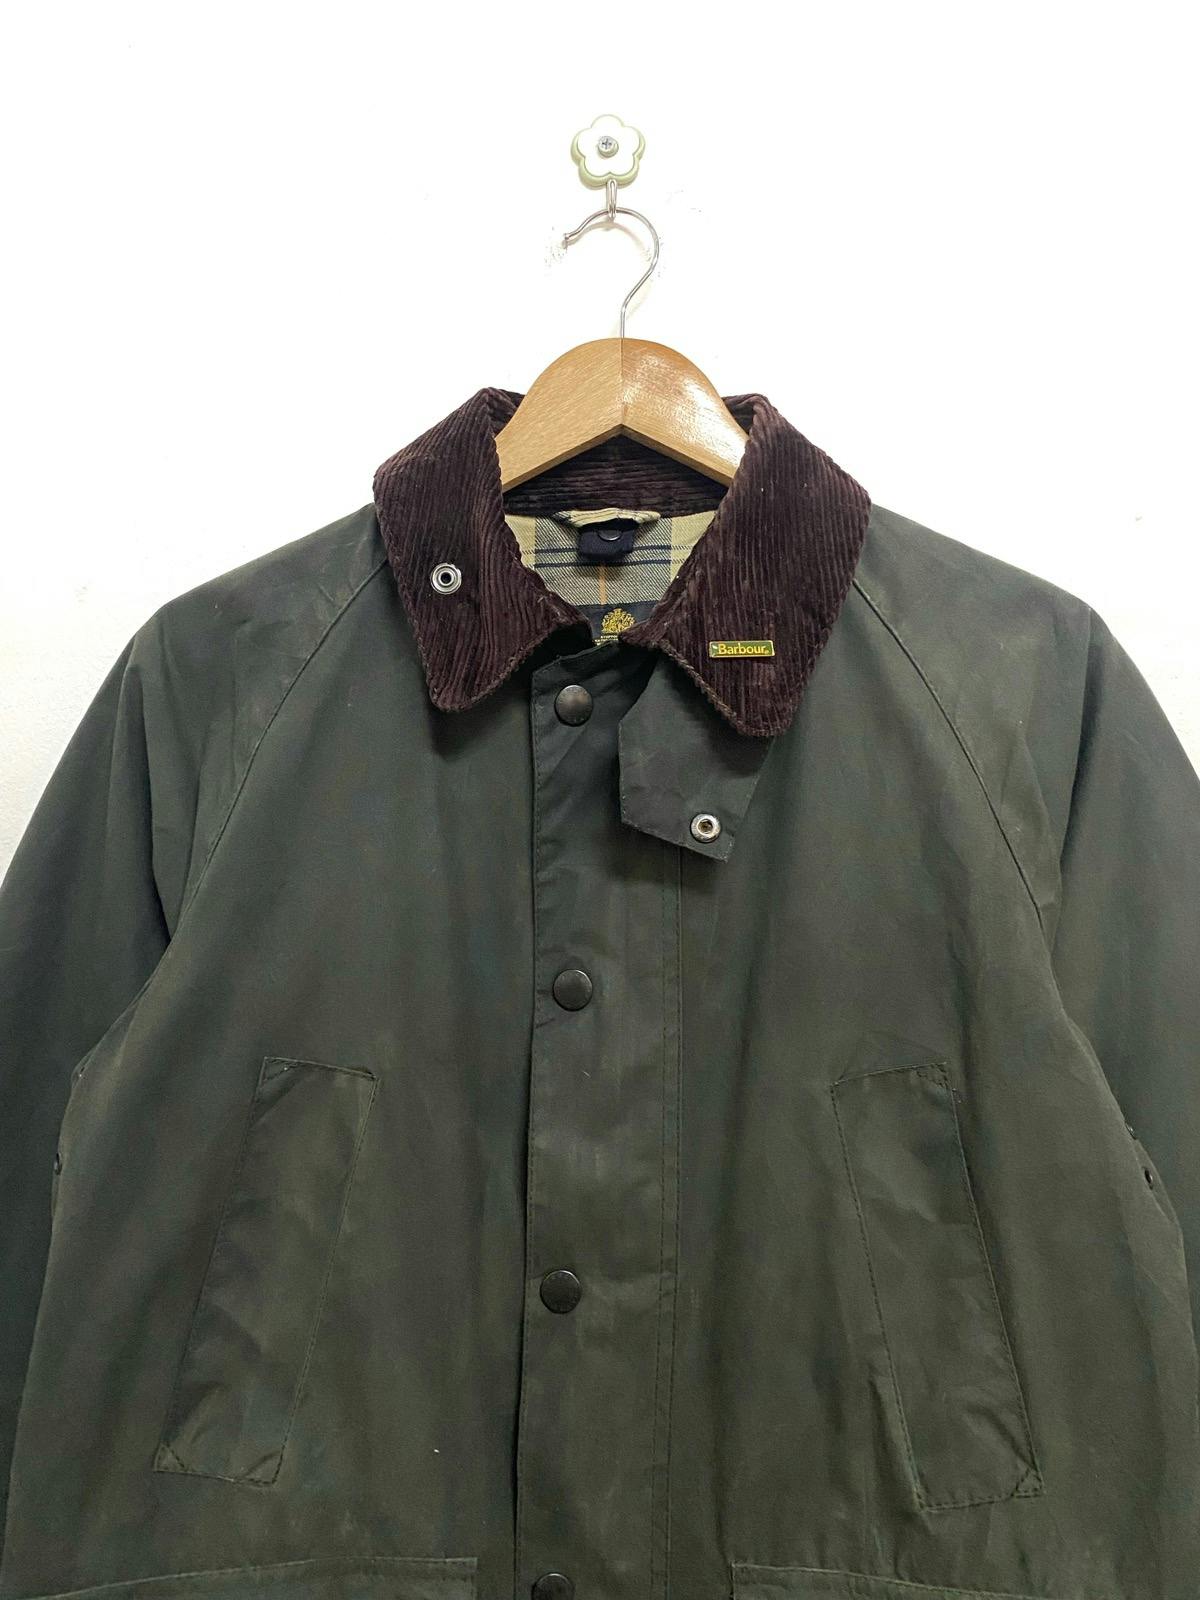 Barbour Classic Bedale AW19 Wax Jacket Made in England - 3